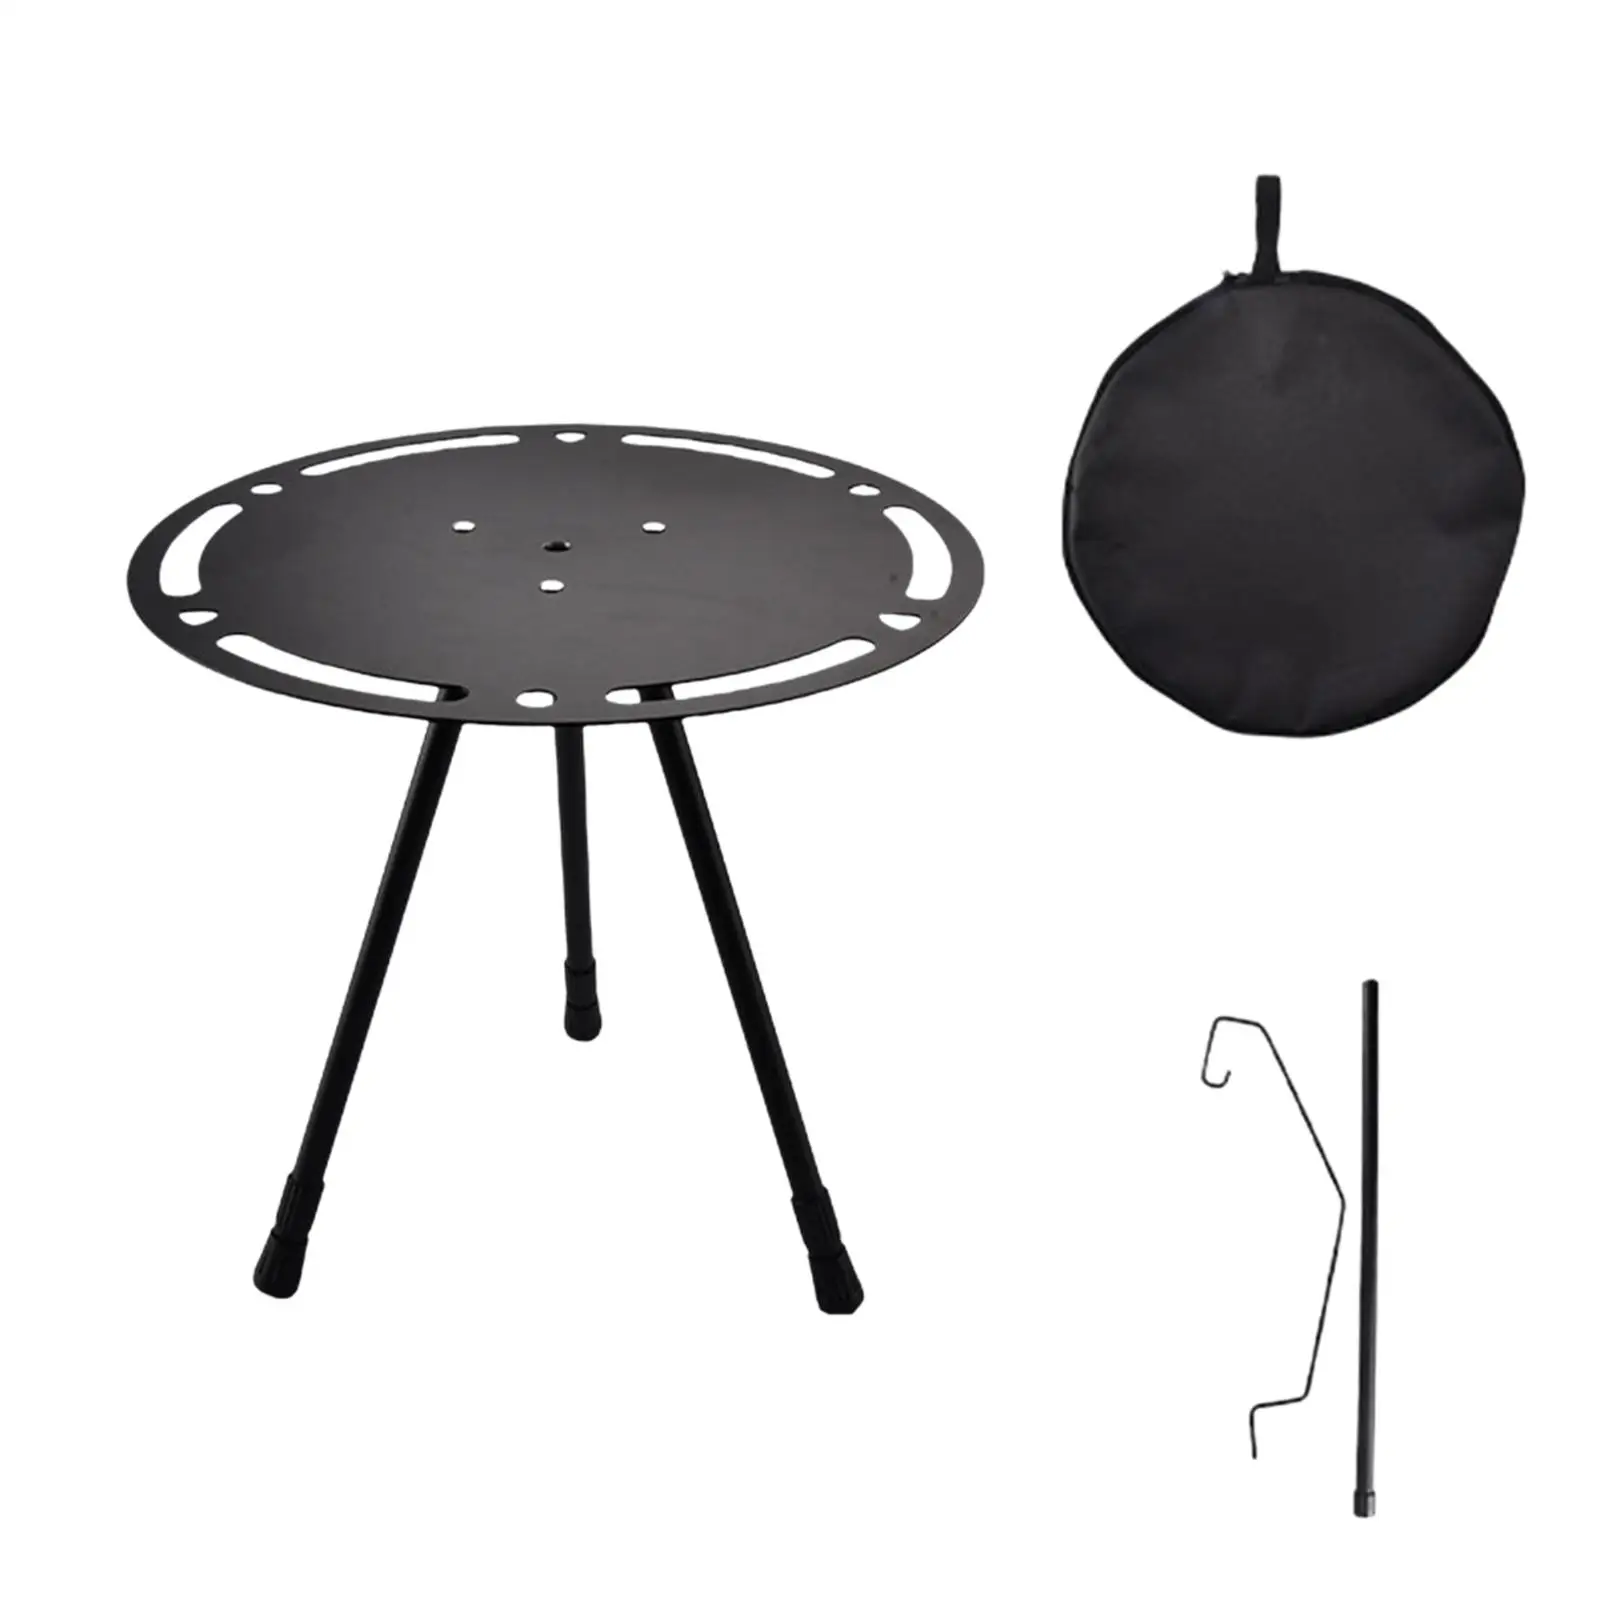 Camping Table, Portable Small Round Table, Retractable Legs with Lamp Pole Outdoor Folding Table for Travel Camping Equipment